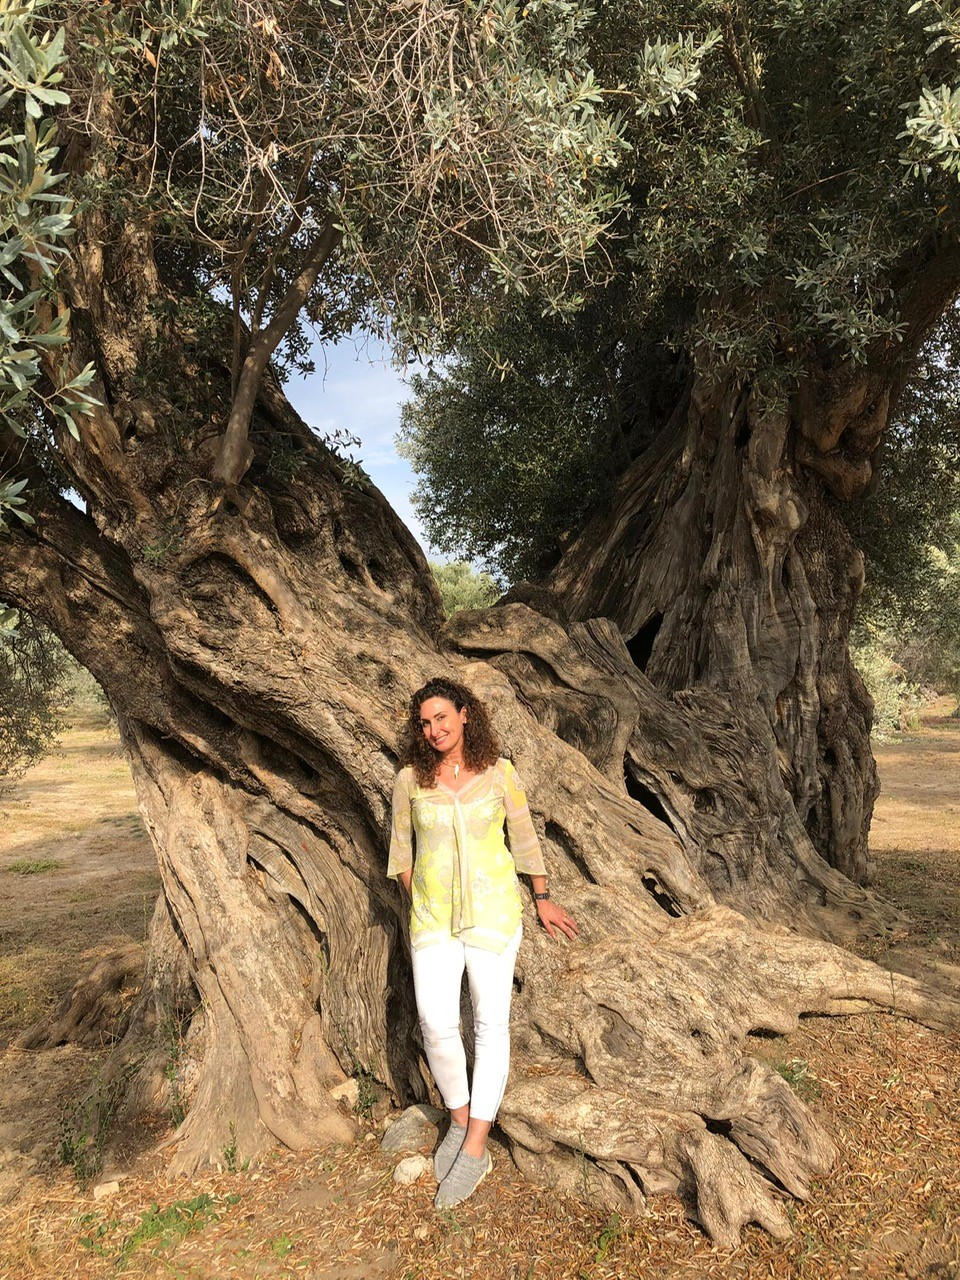 MITERA mother tree in Crete (GR) approx. 4000 years old